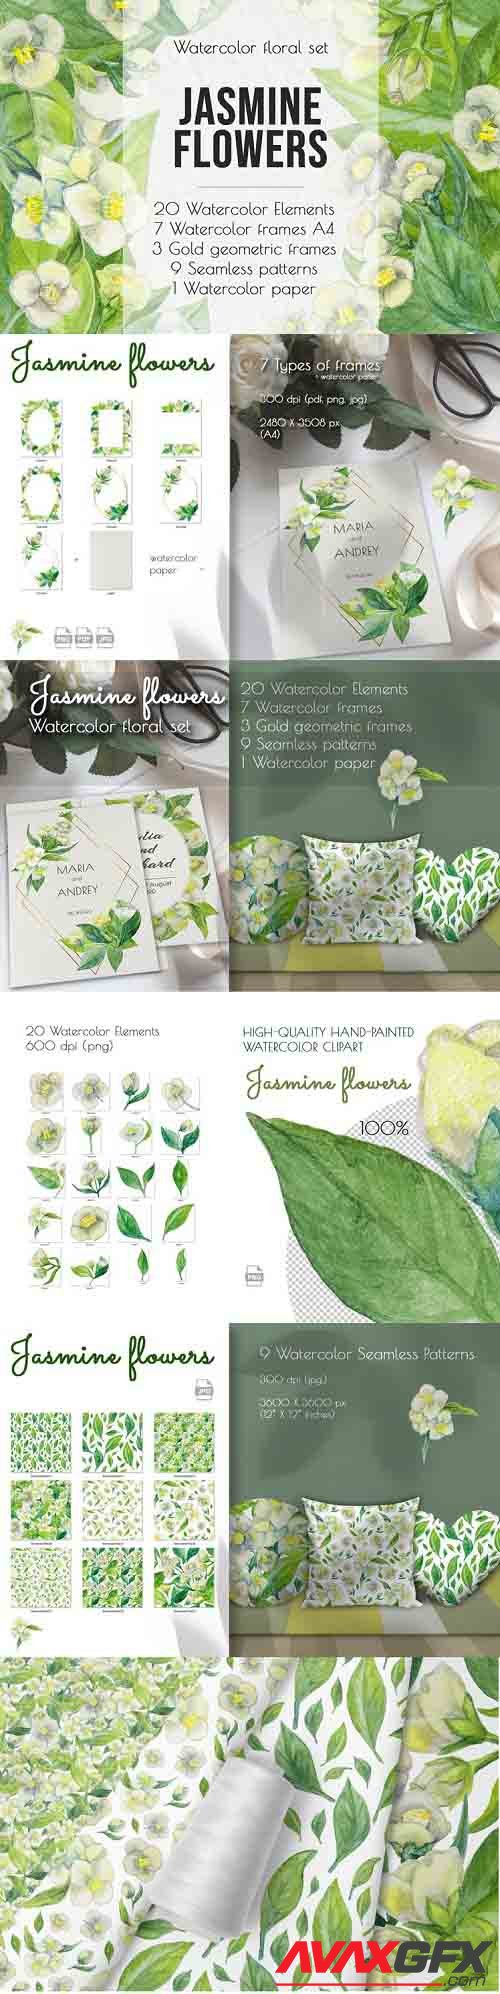 Jasmine flowers and leaves. Watercolor clip art - 864260